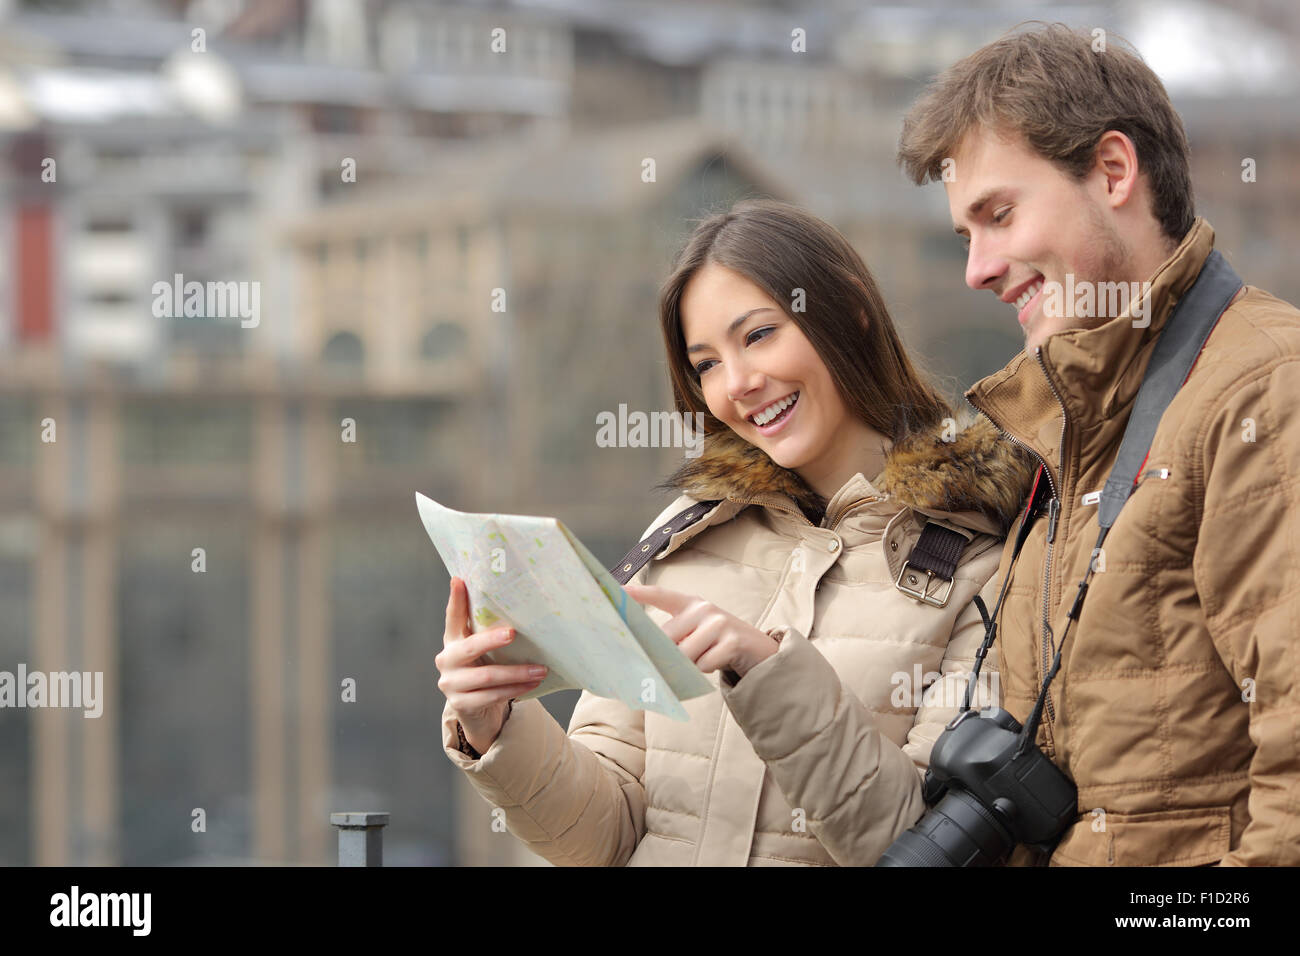 Couple of tourists consulting a guide in winter with an urban background Stock Photo